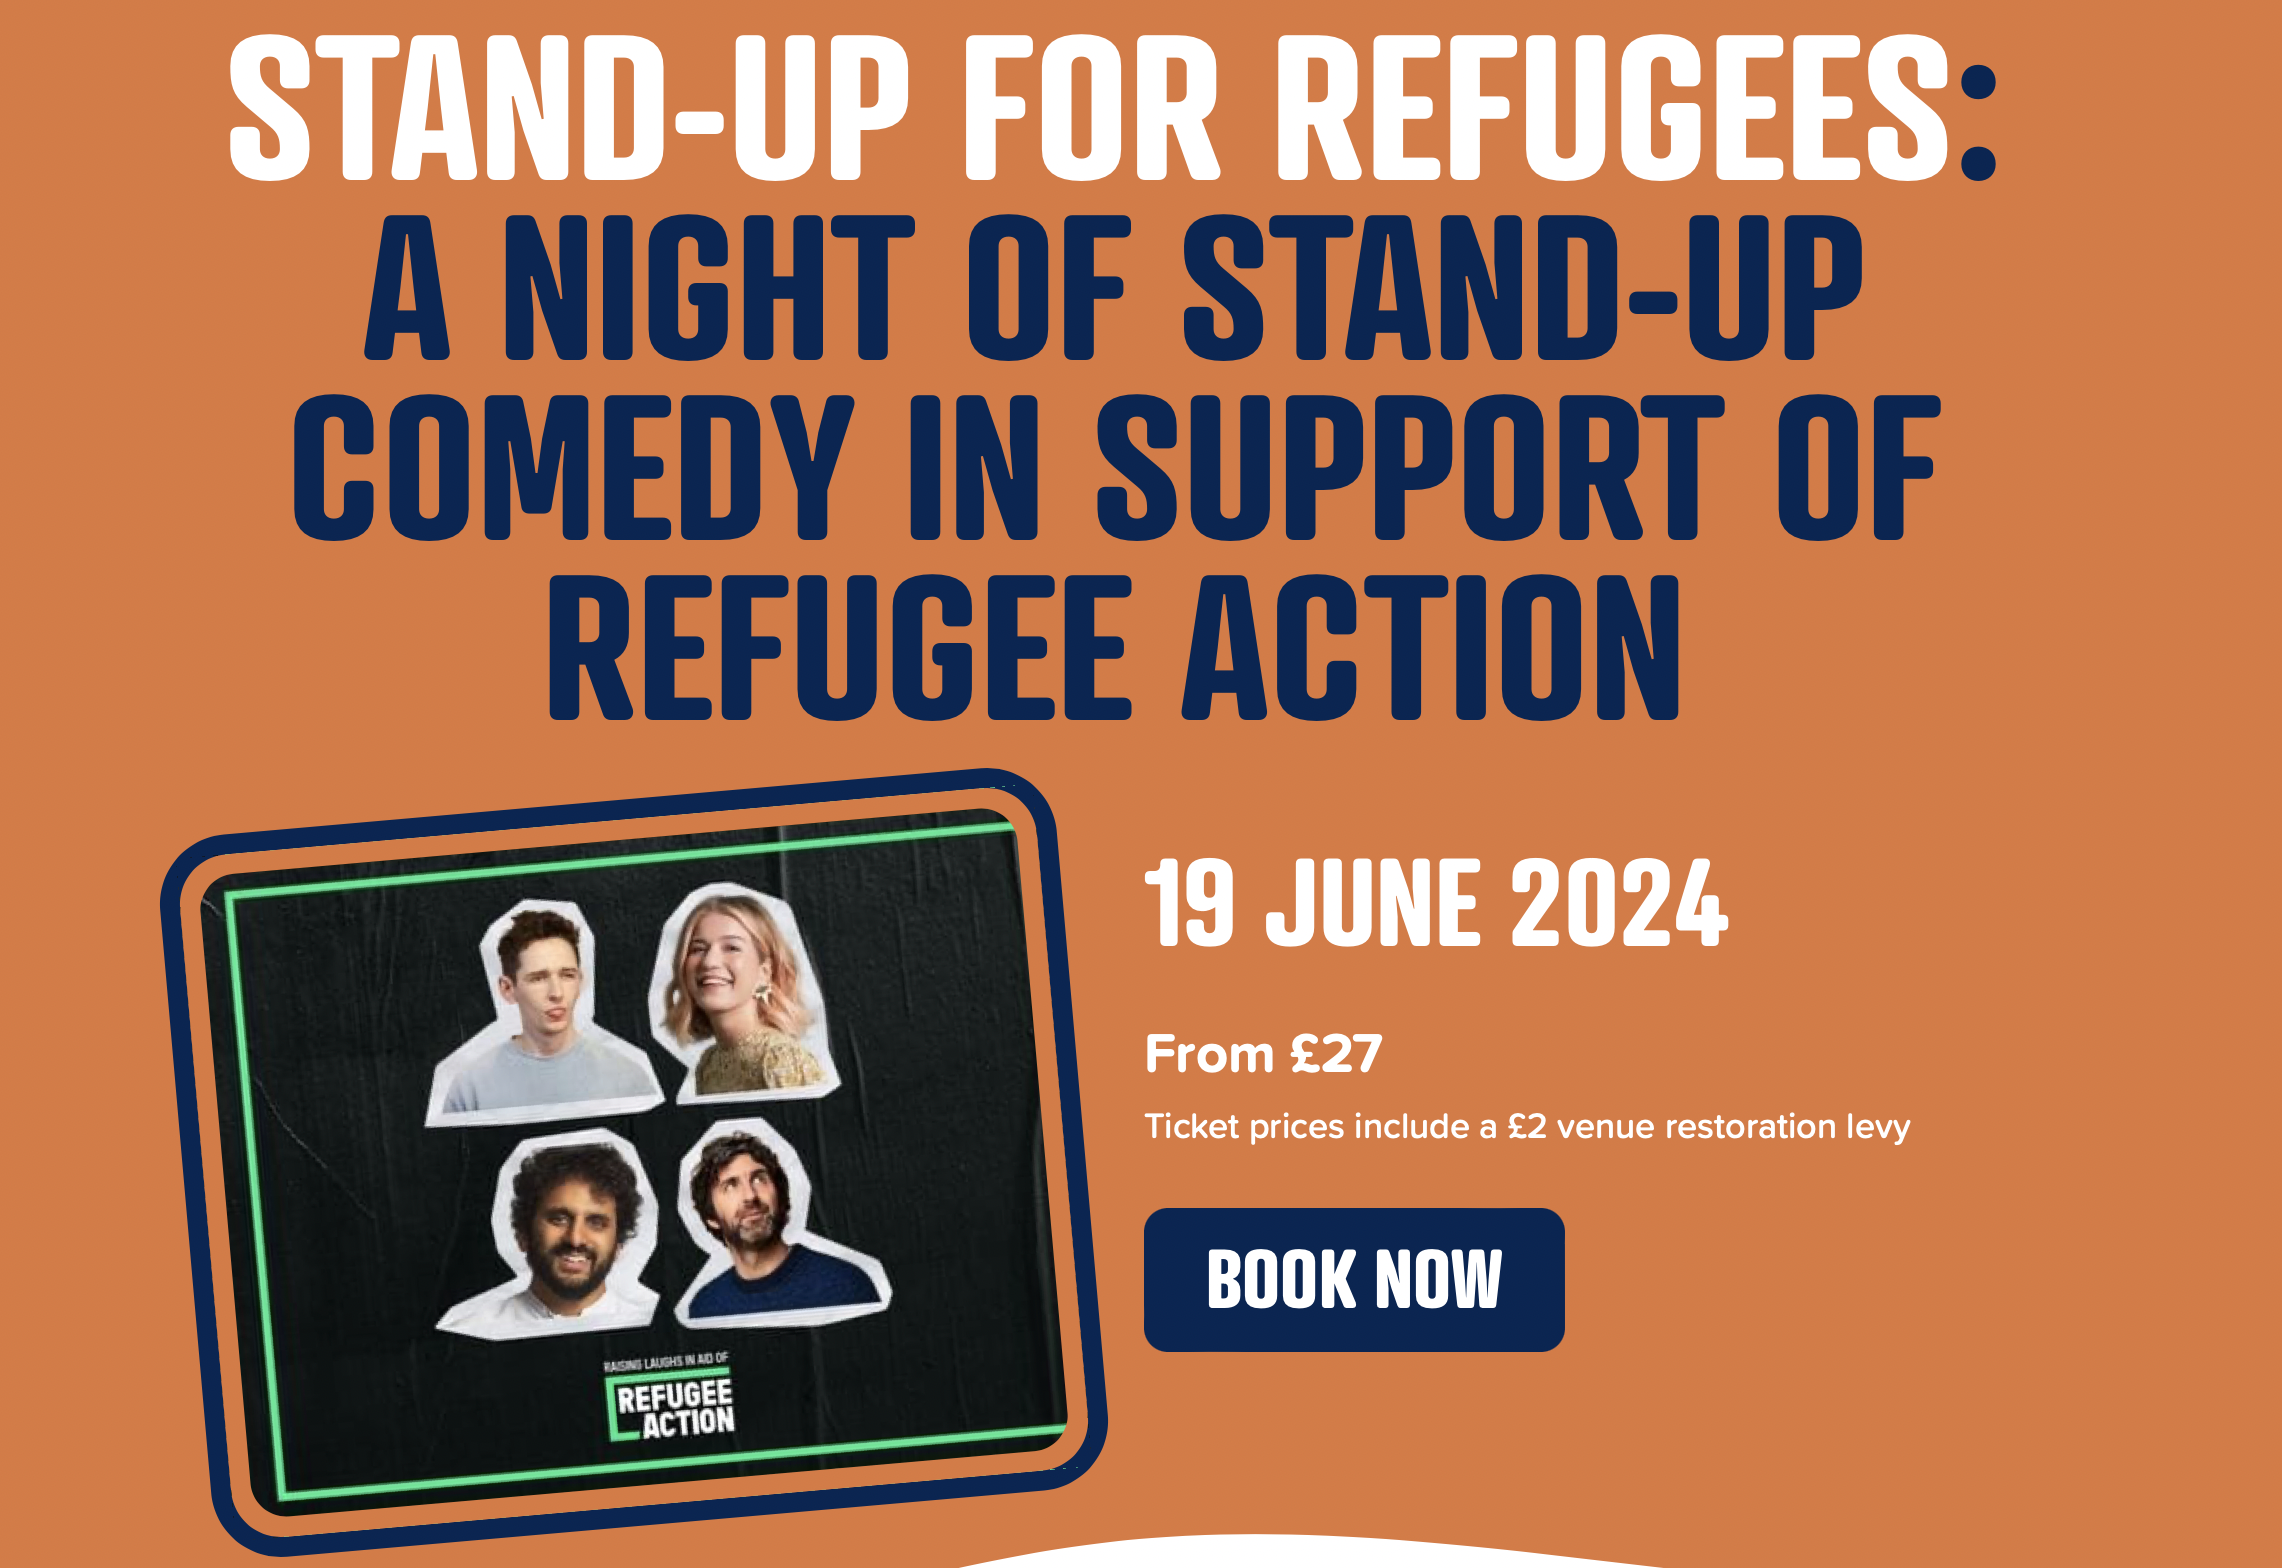 STAND-UP FOR REFUGEES: A NIGHT OF STAND-UP COMEDY IN SUPPORT OF REFUGEE ACTION